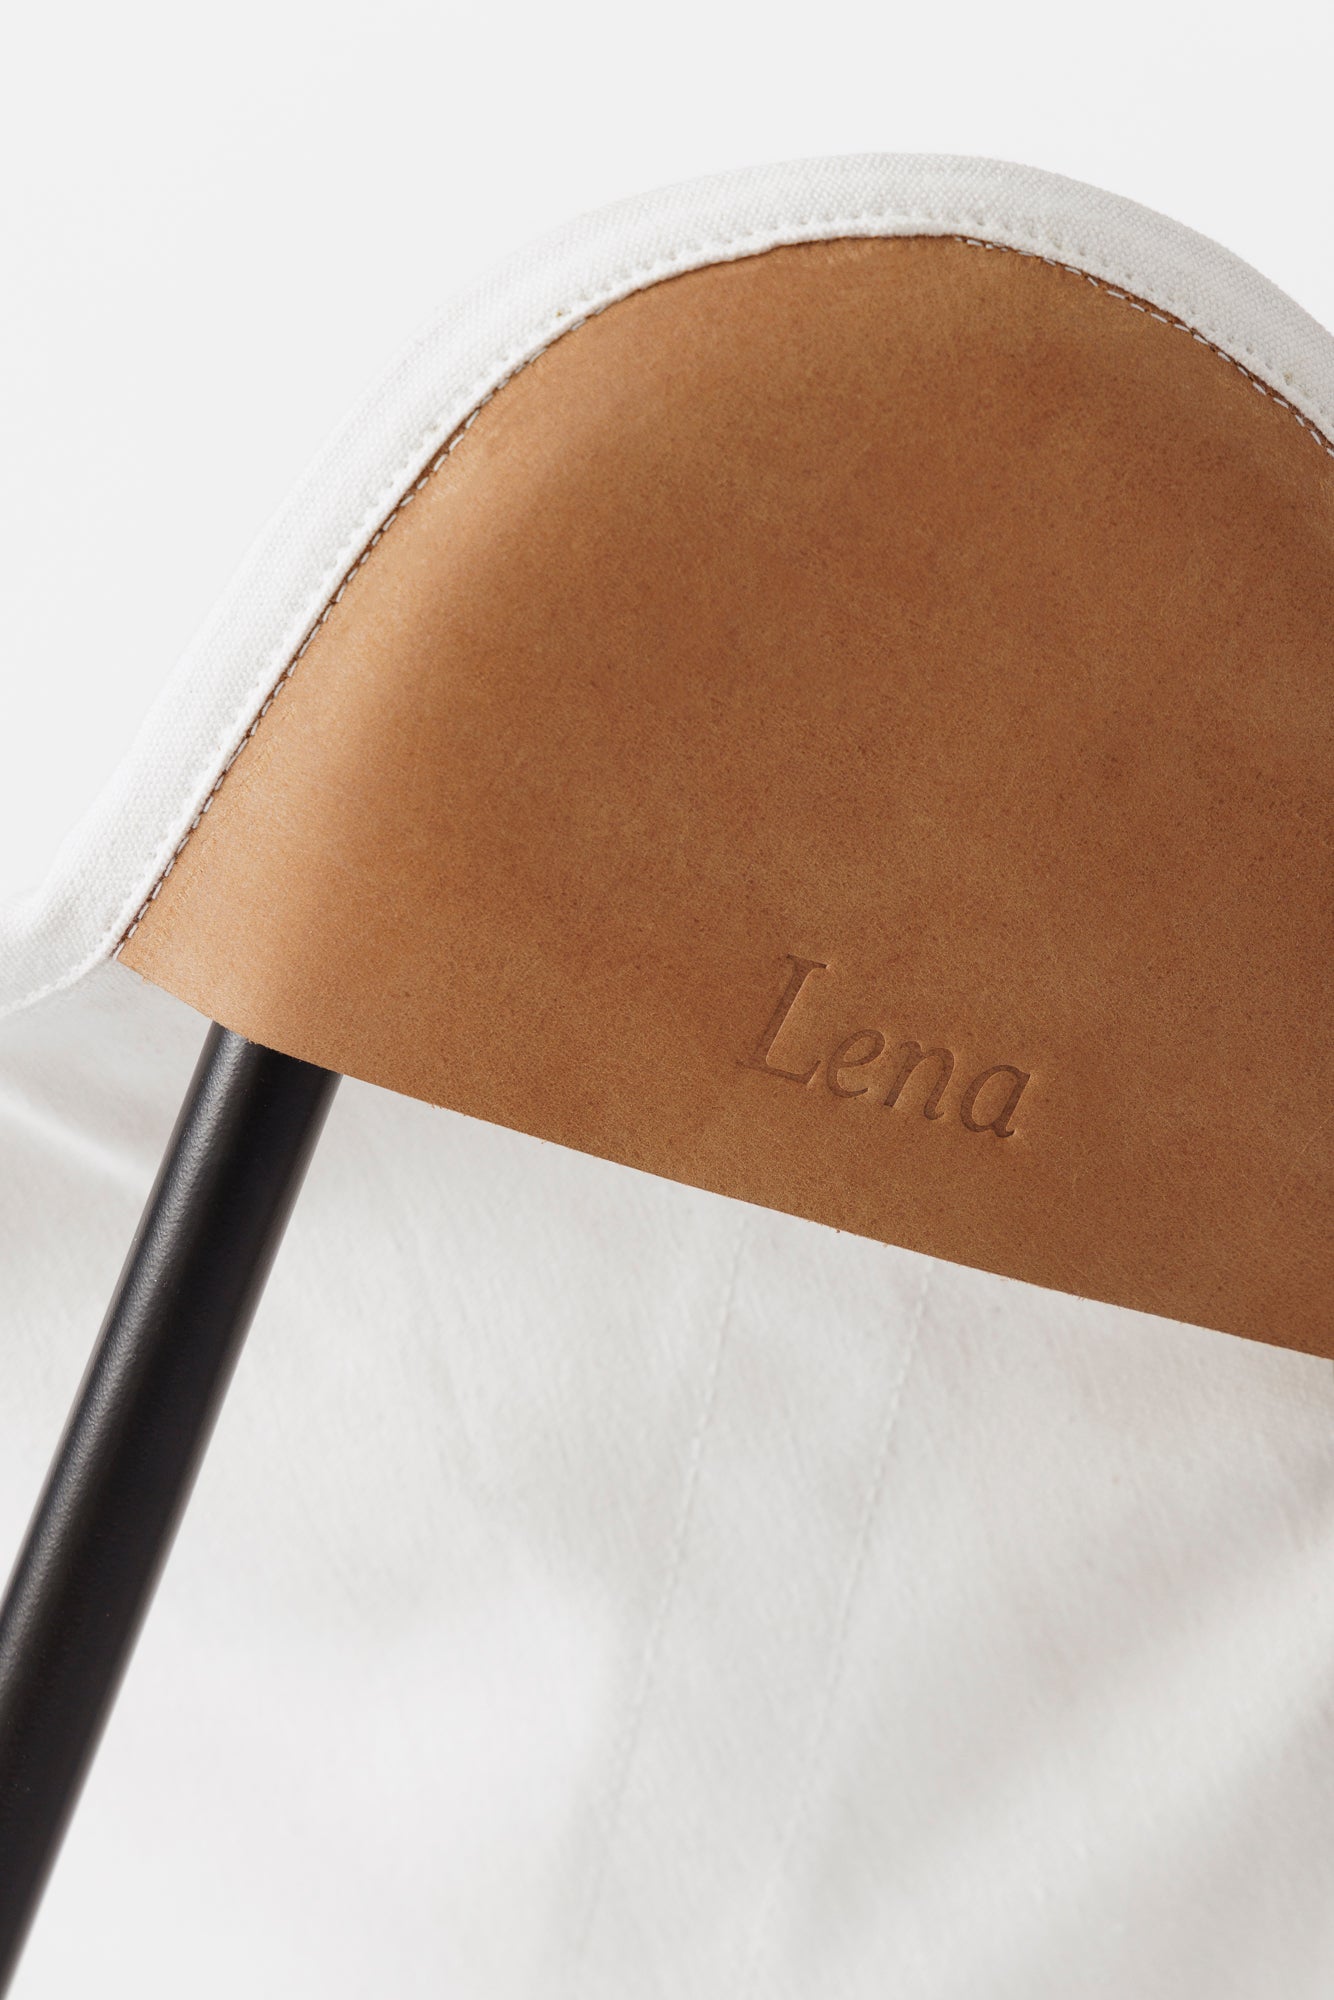 Lena Chair- White Canvas - Butterfly Chair